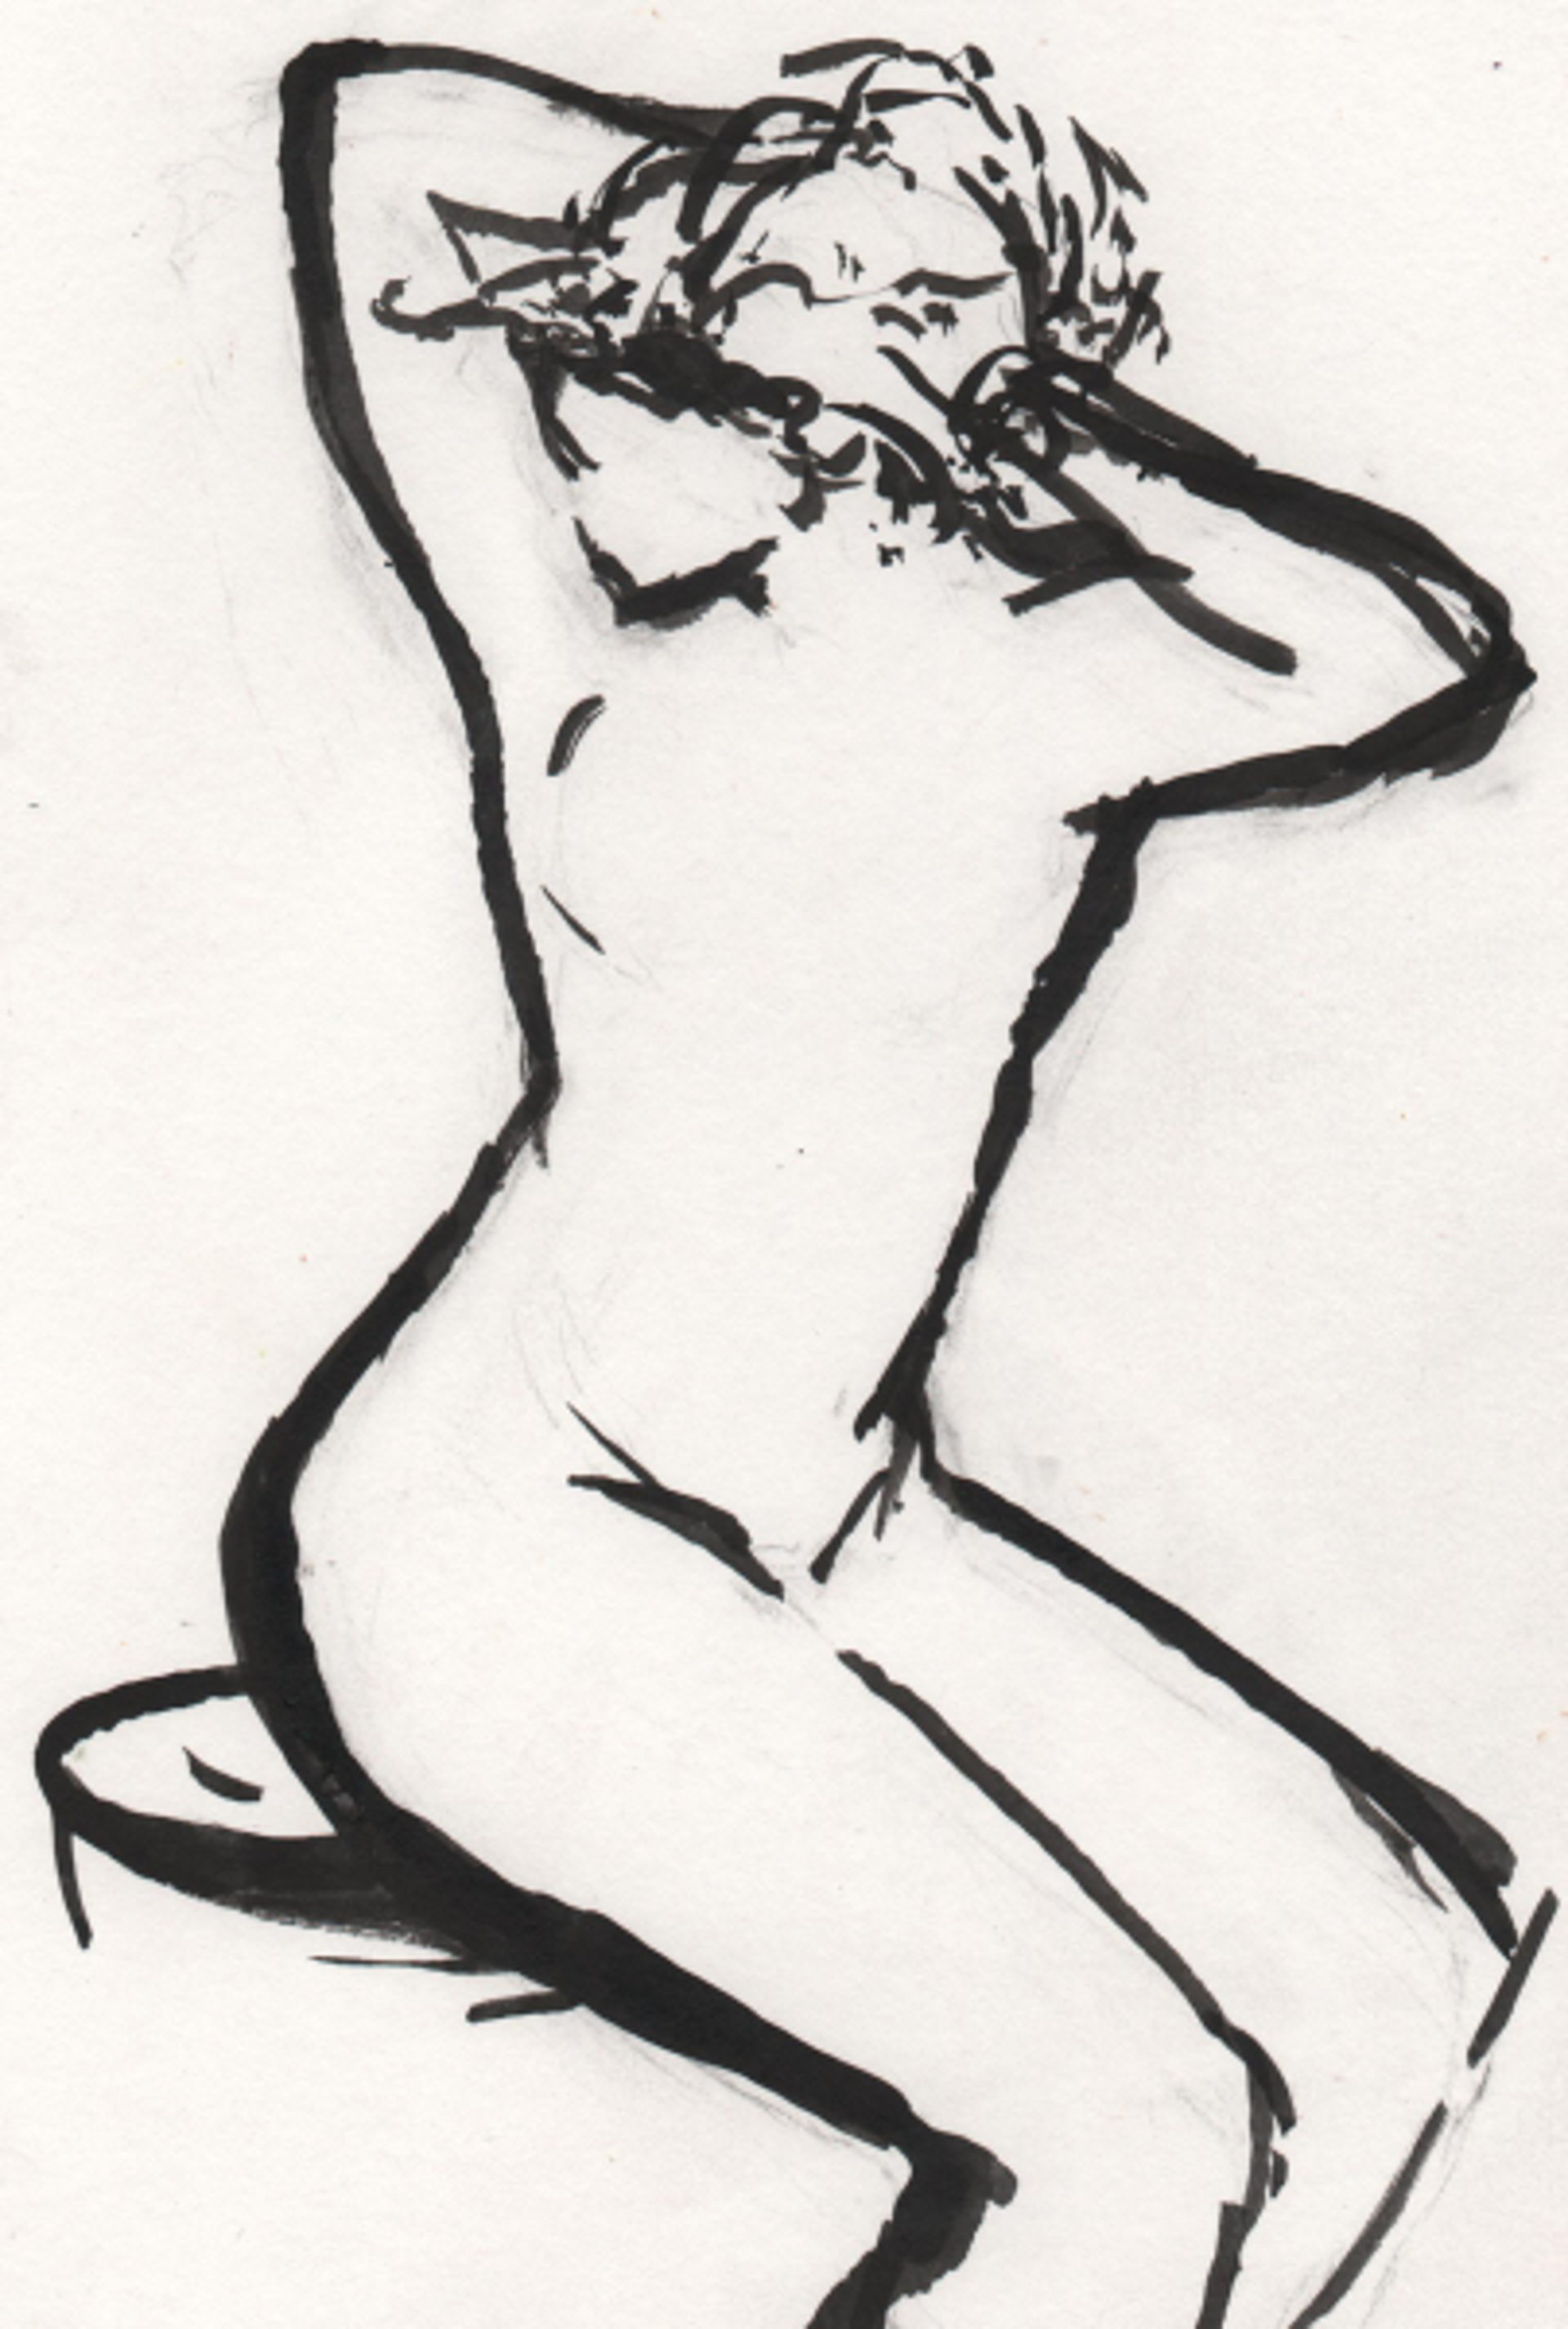 Untitled (Turning Figure) by Gail Foster